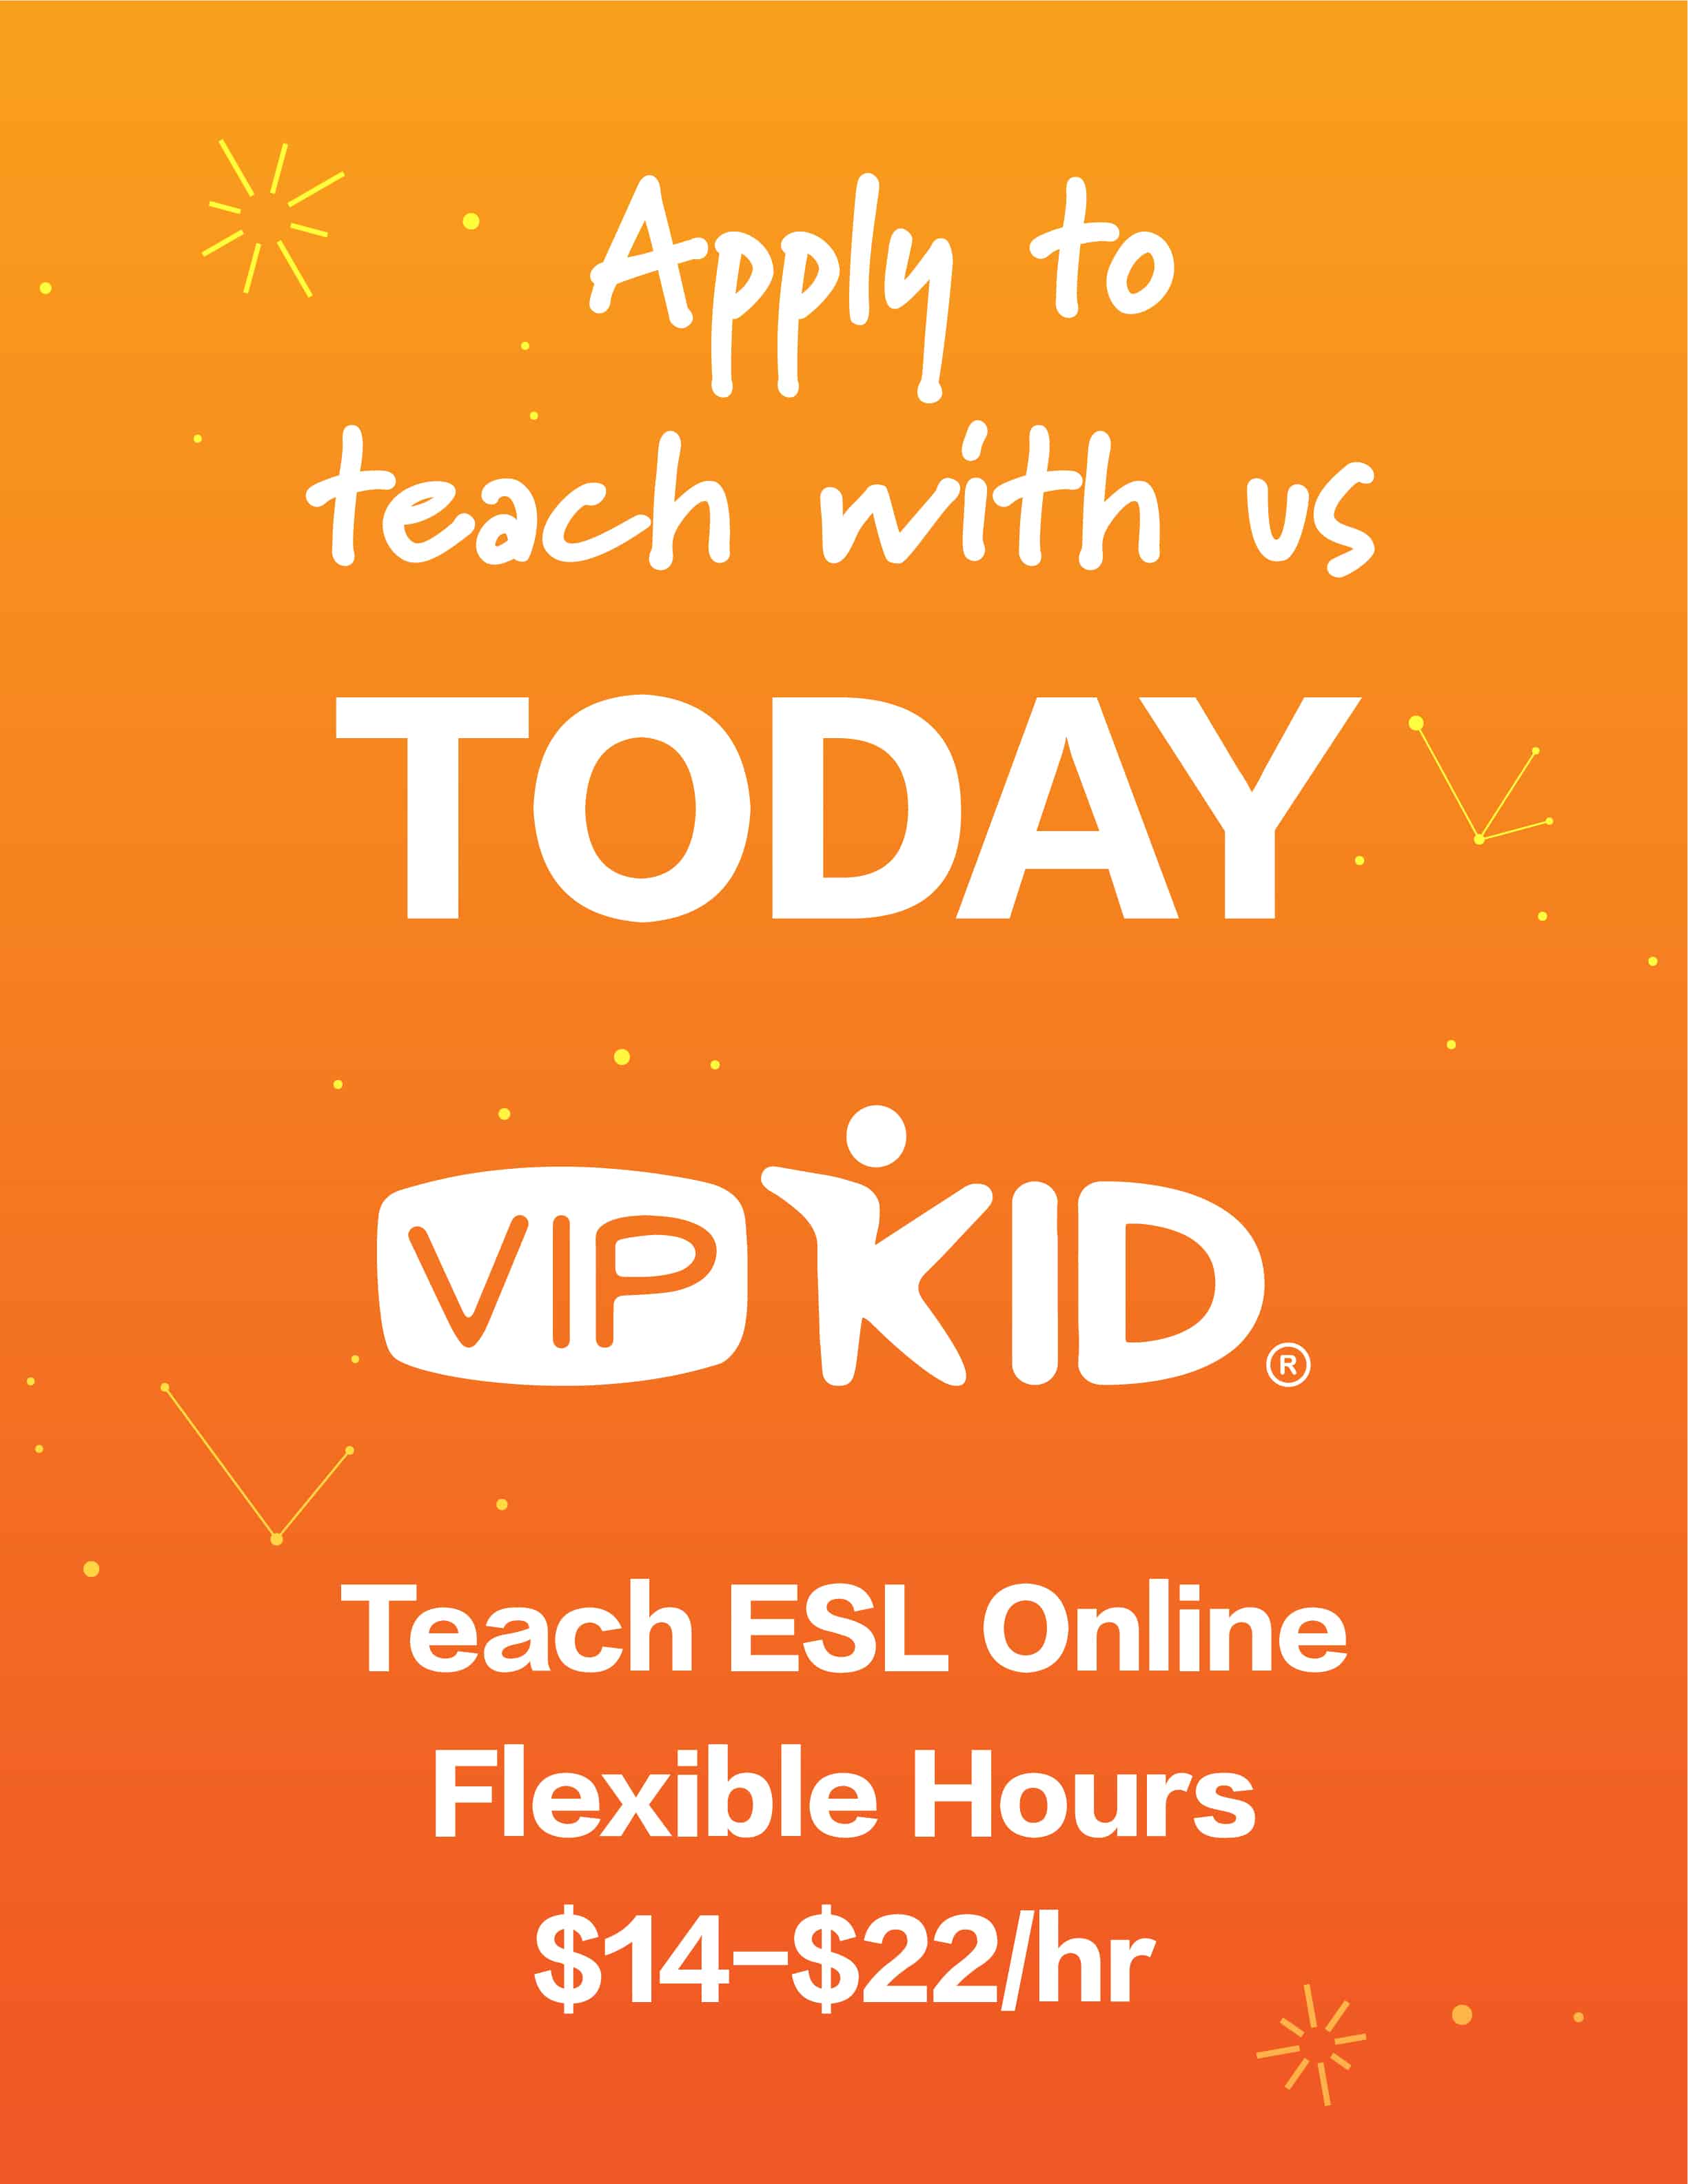 It's never been easier to make part-time money at home! With VIPKID, teachers average $19/hour from the comfort of their home!